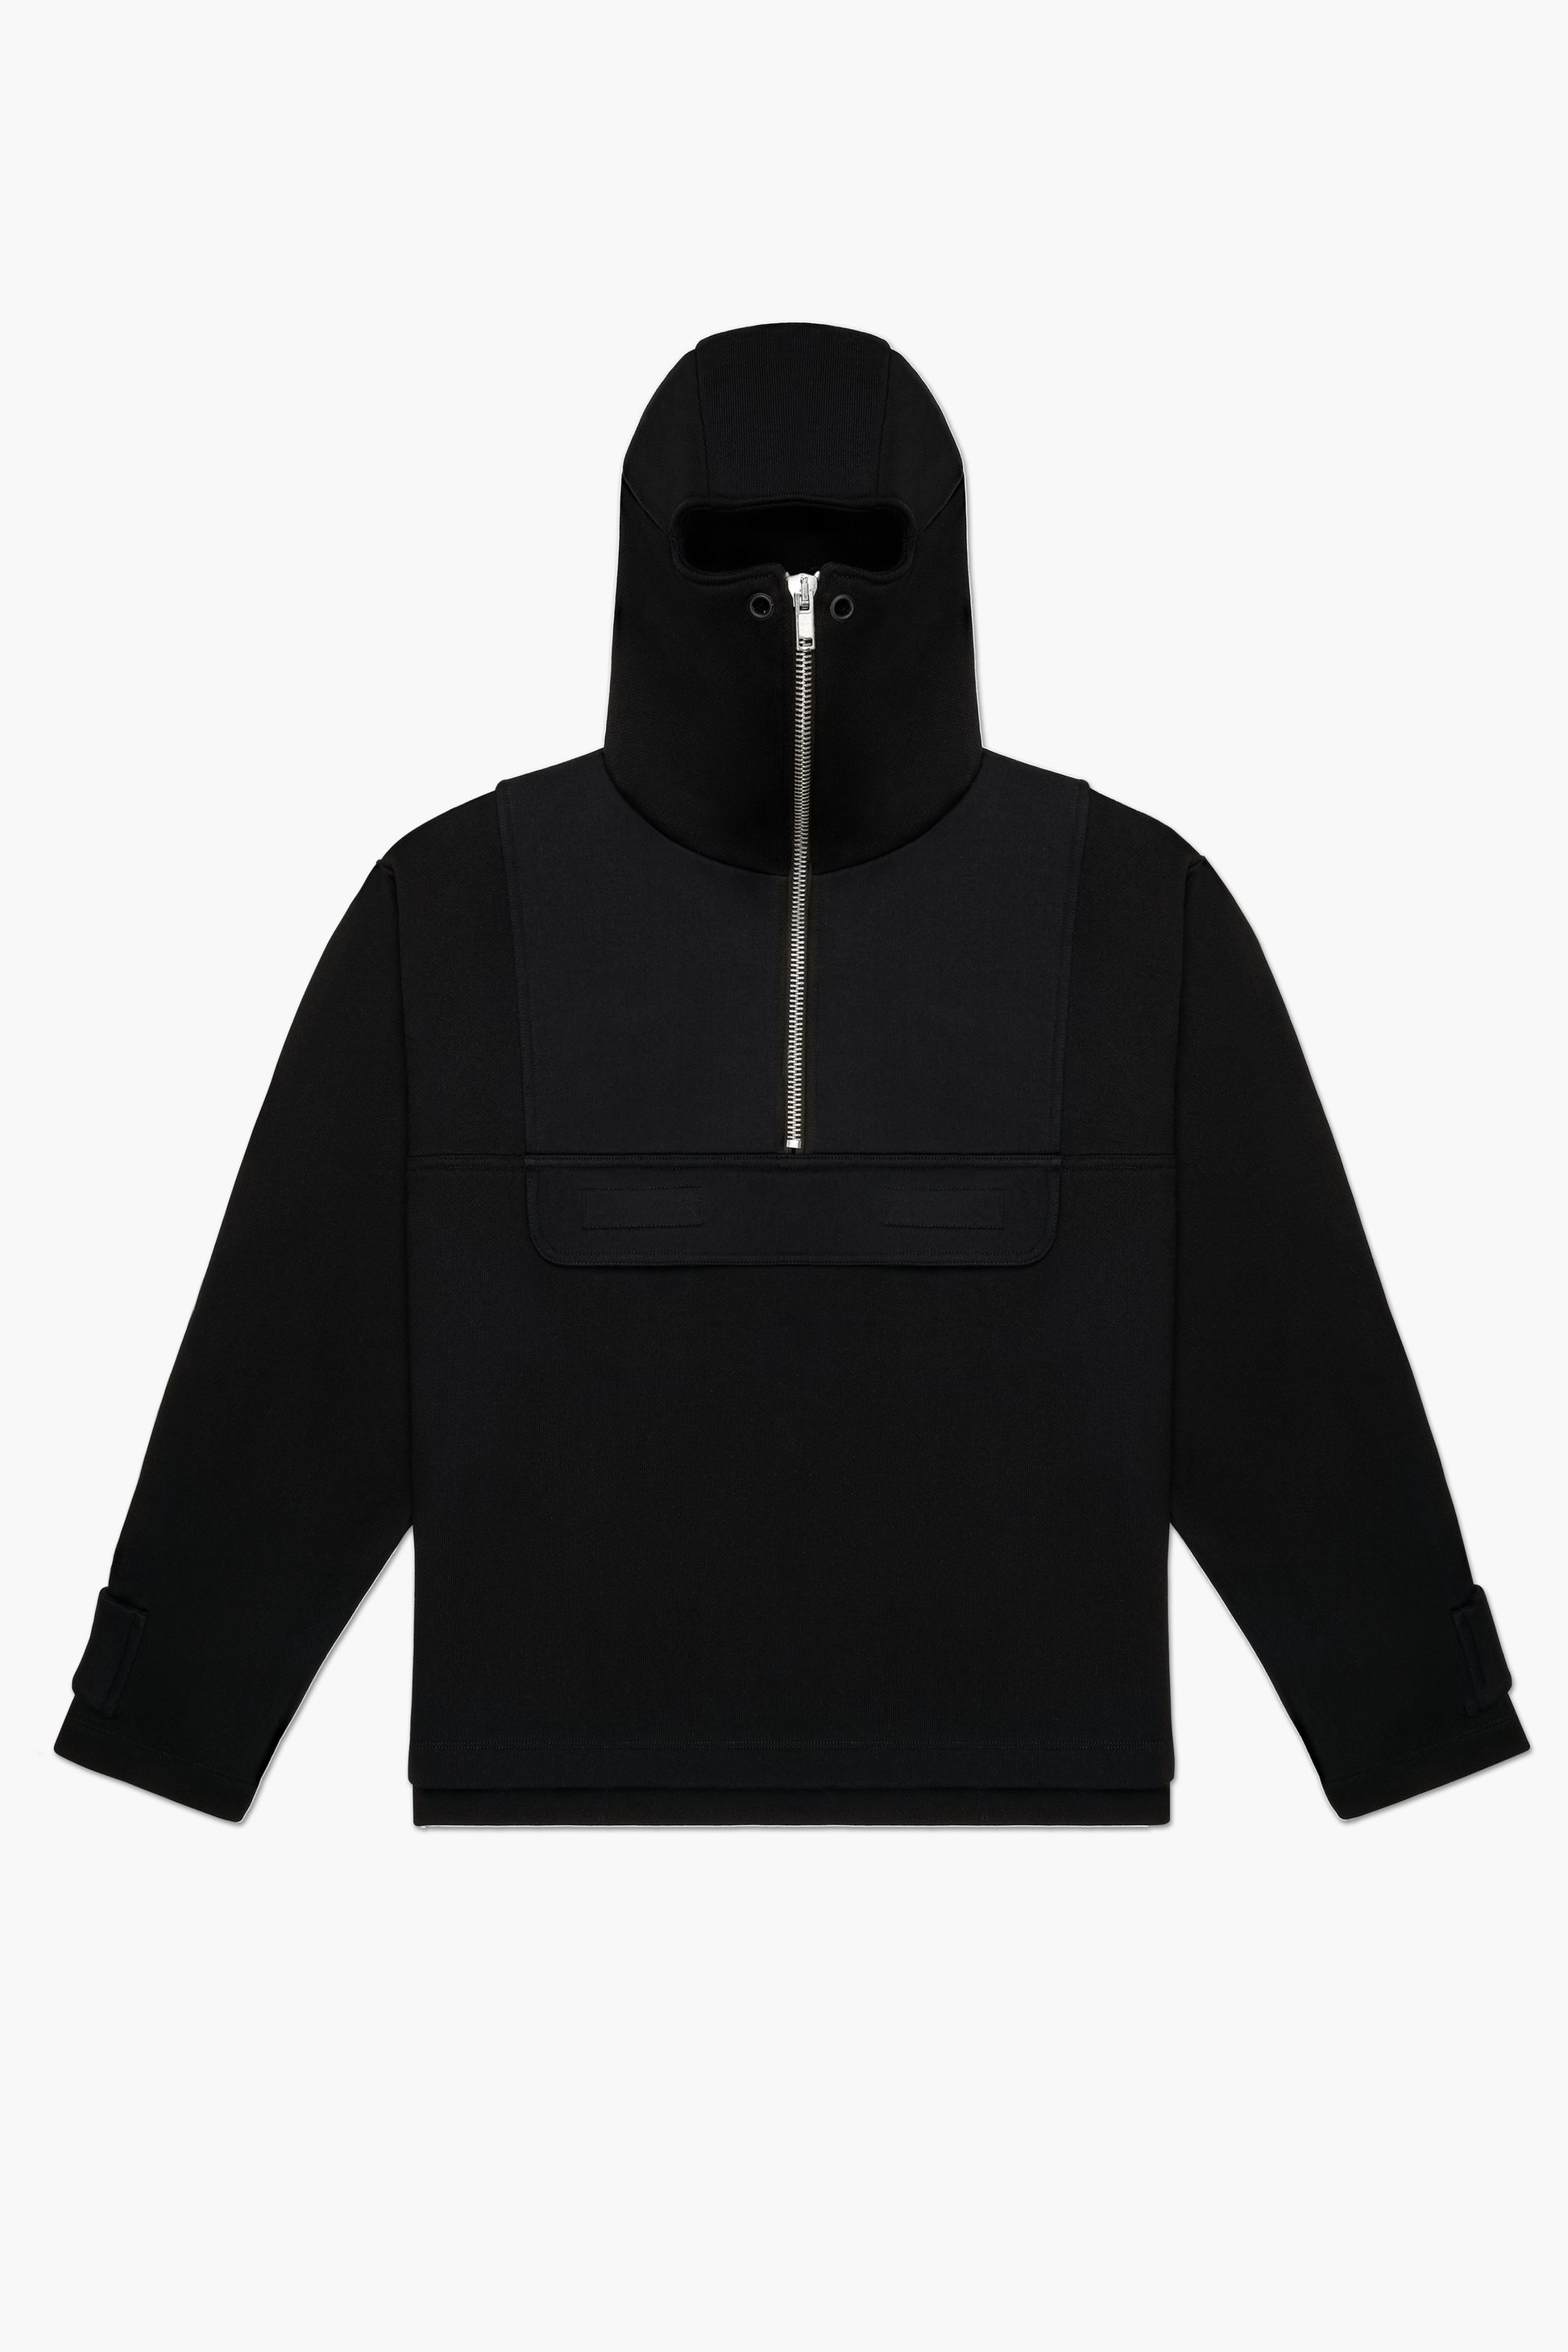 Front of black balaclava anorak zipped all the way up ovnnie